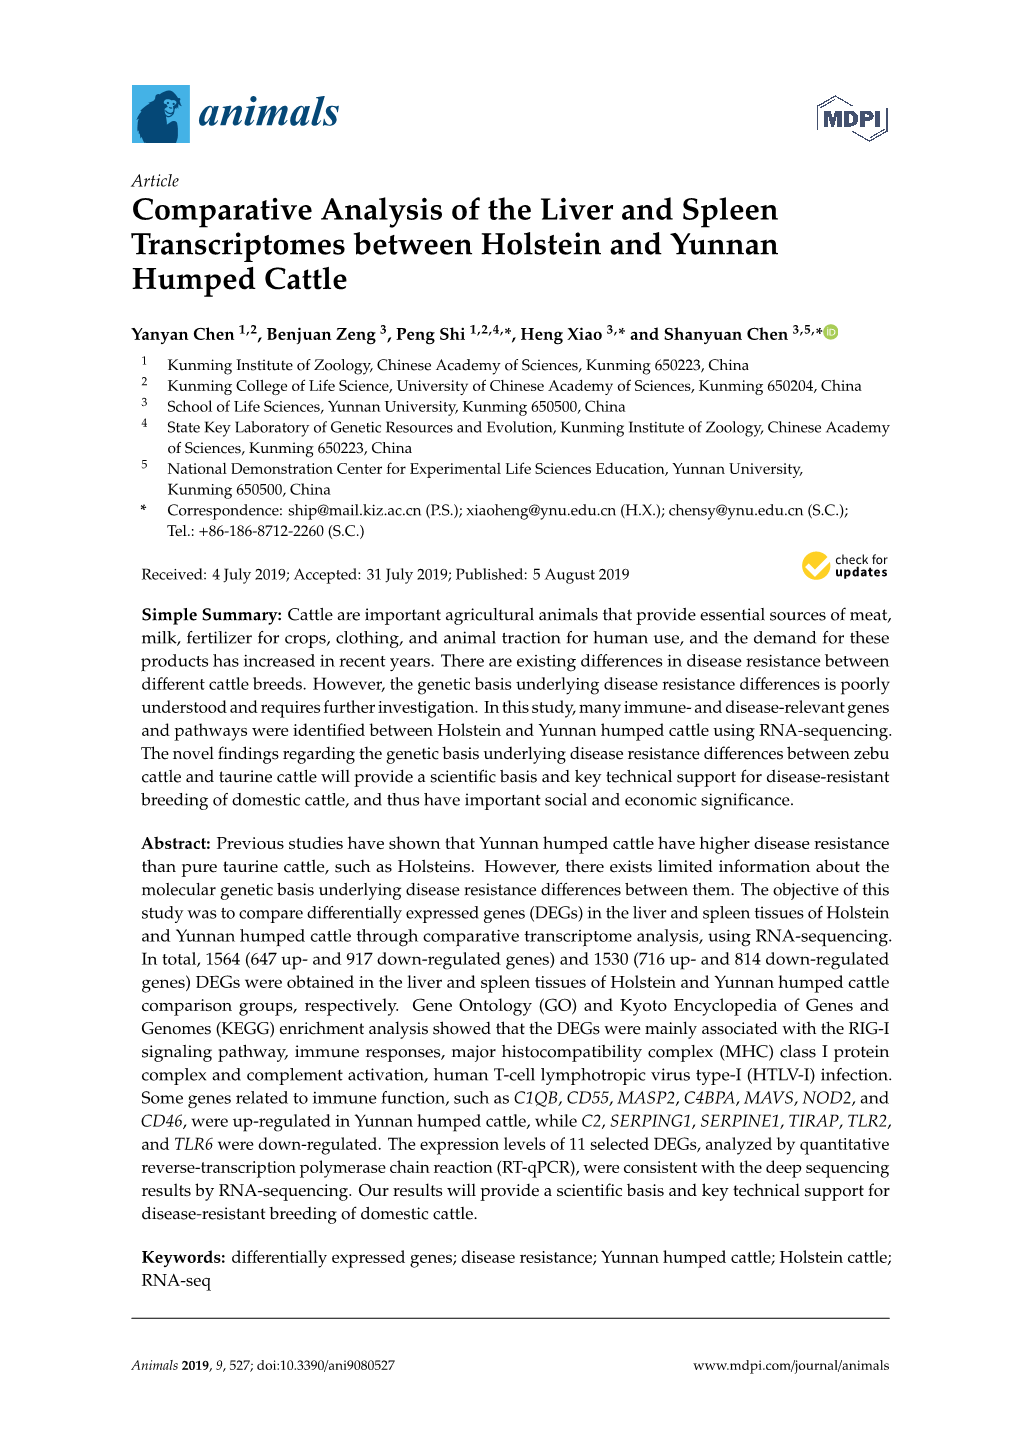 Comparative Analysis of the Liver and Spleen Transcriptomes Between Holstein and Yunnan Humped Cattle